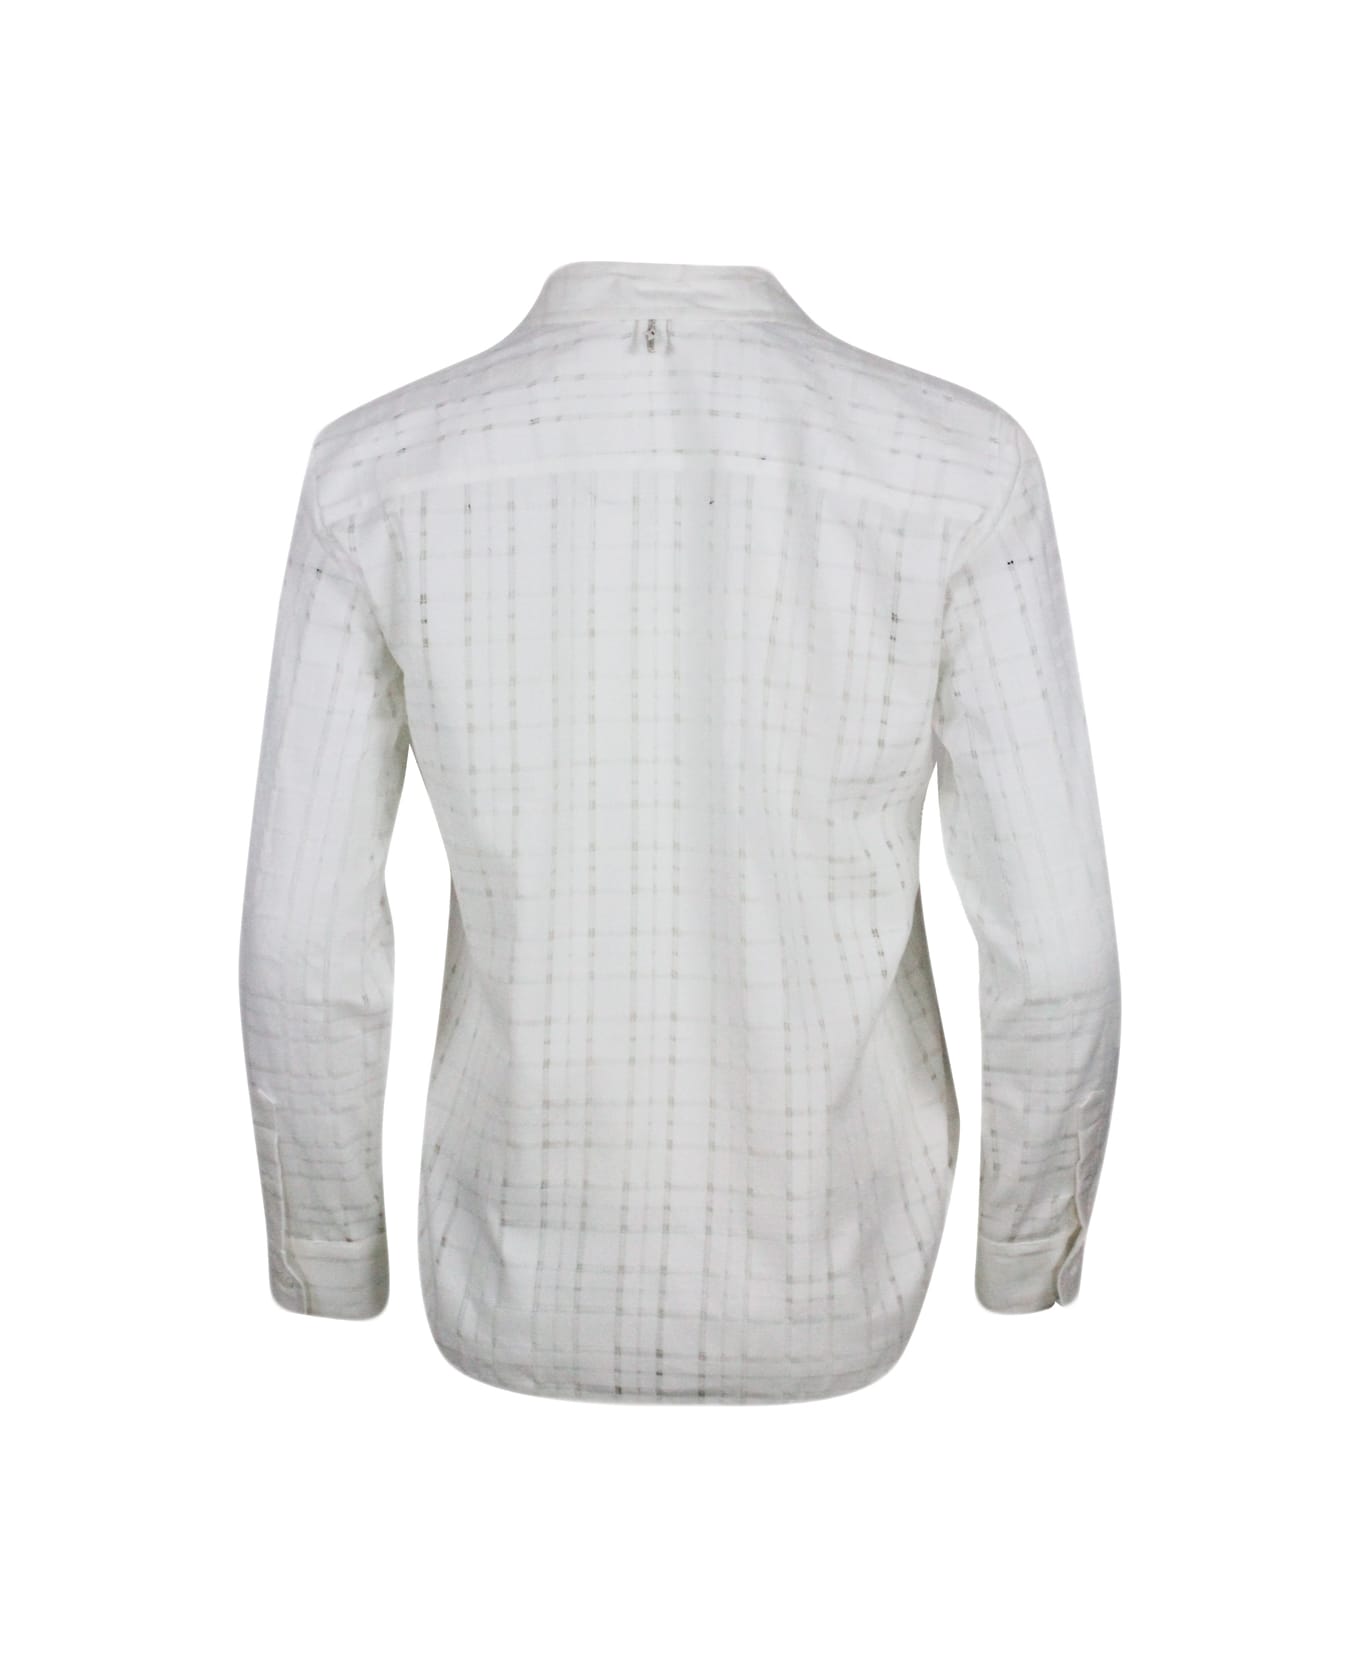 Lorena Antoniazzi Long-sleeved Shirt In Stretch Cotton With Perforated Window Work And Including Coordinated Top - cream